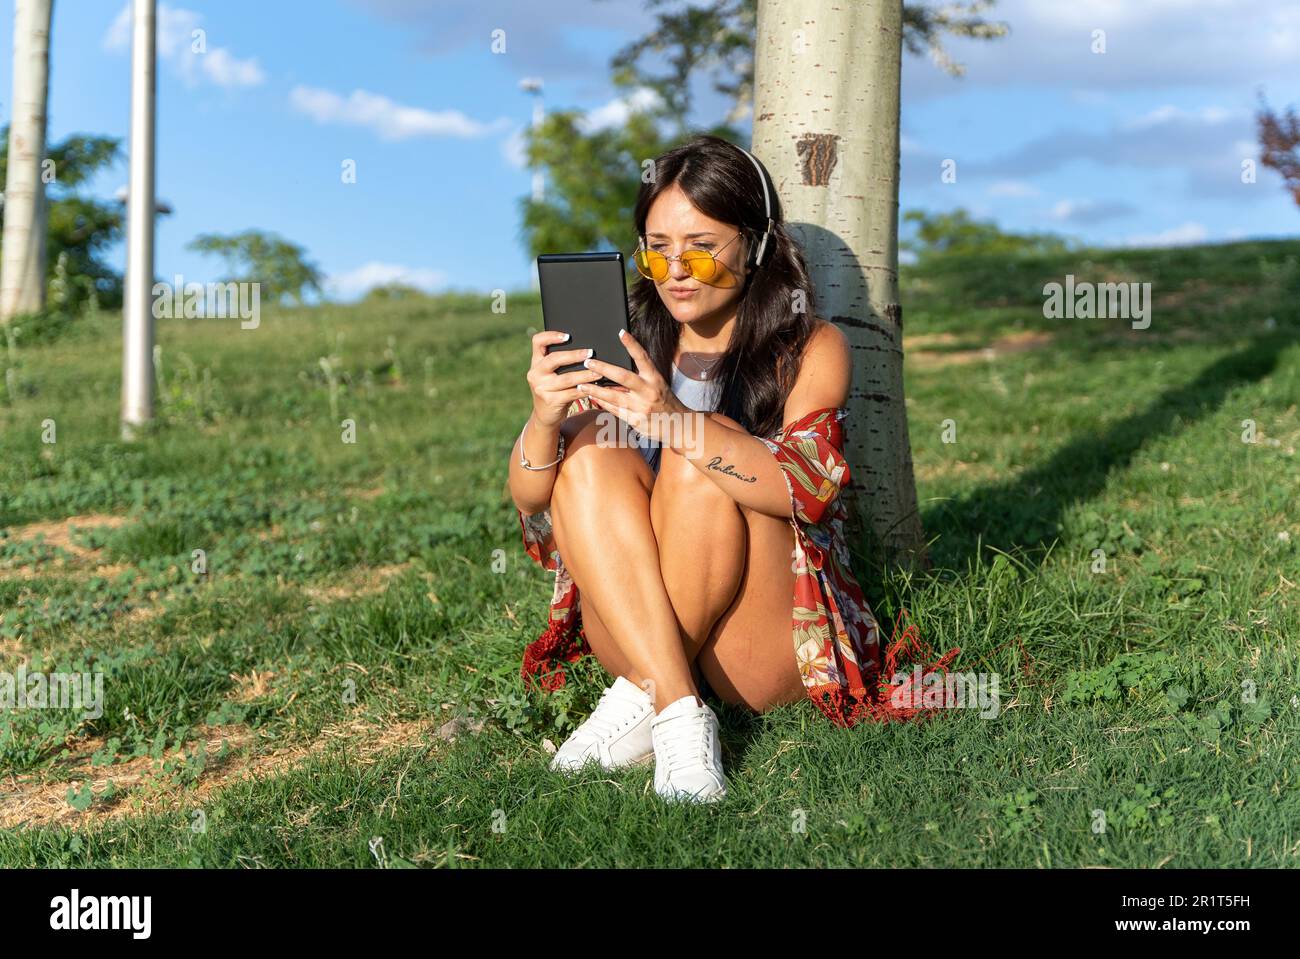 Woman with sunglasses and headphones enjoying reading an ebook while relaxing sitting on grass in a park. Technology concept. Stock Photo